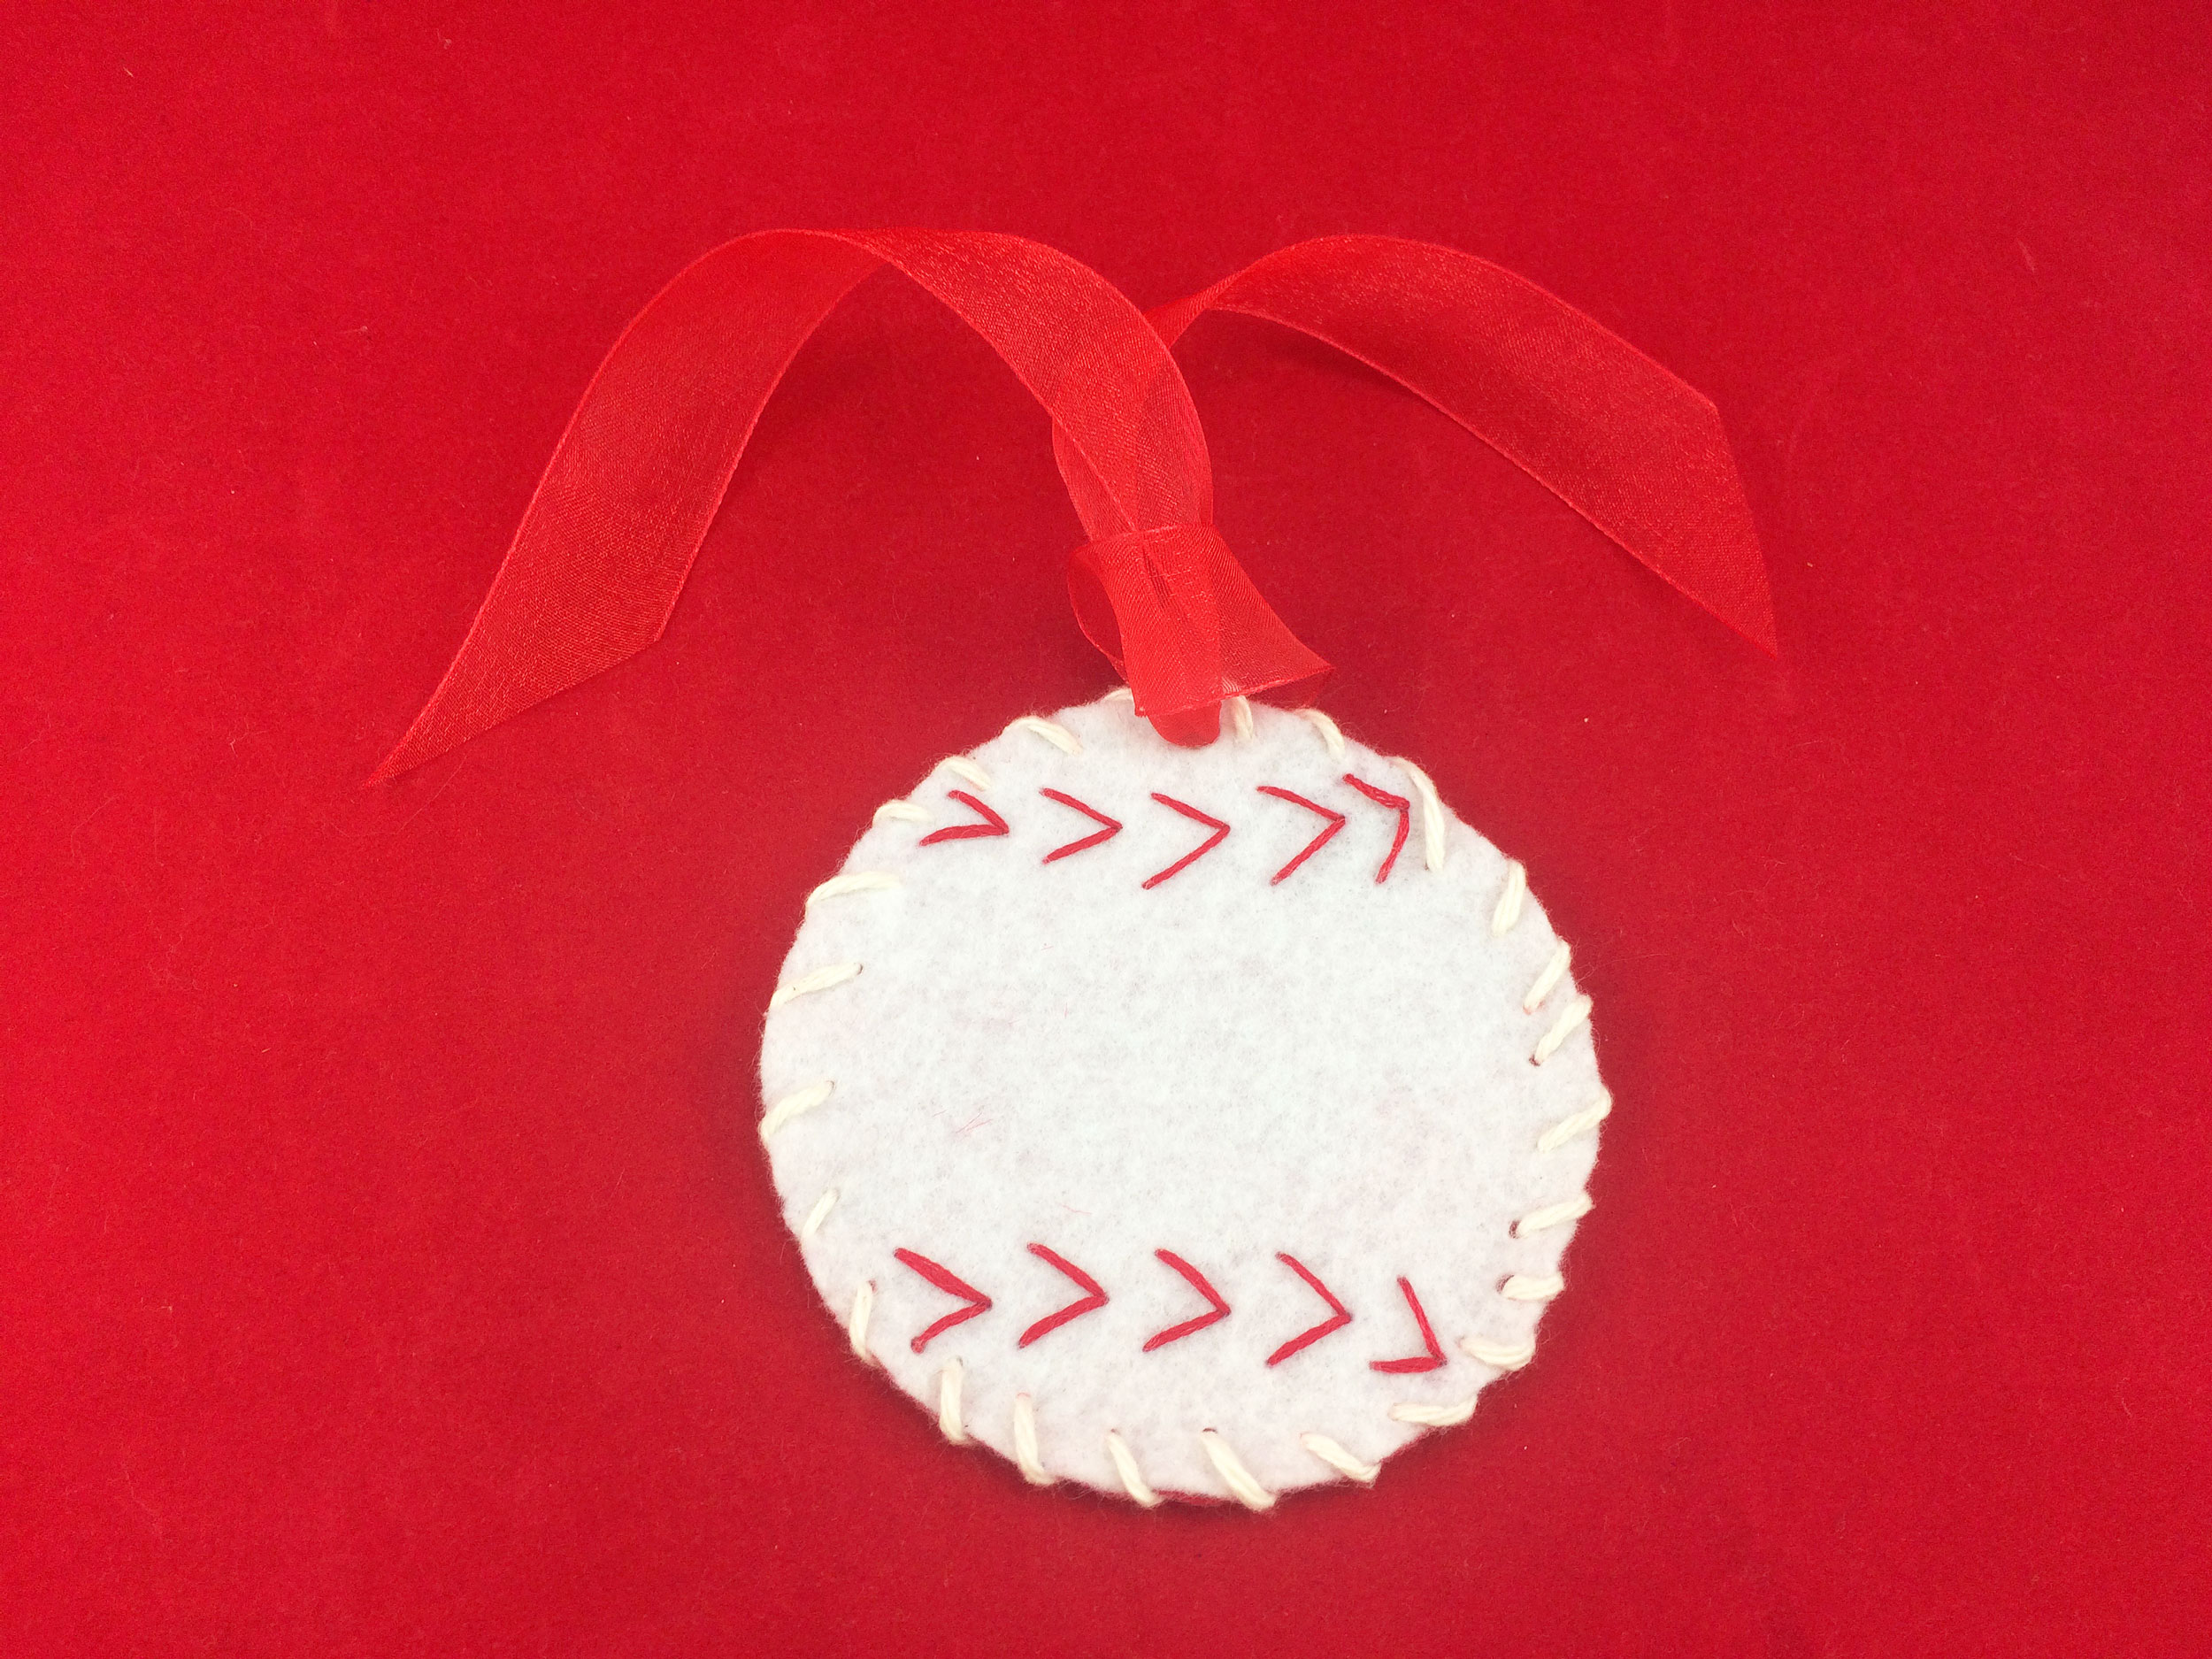 Ornament loop ribbon sewn to the top of the baseball using a needle. | OrnamentShop.com